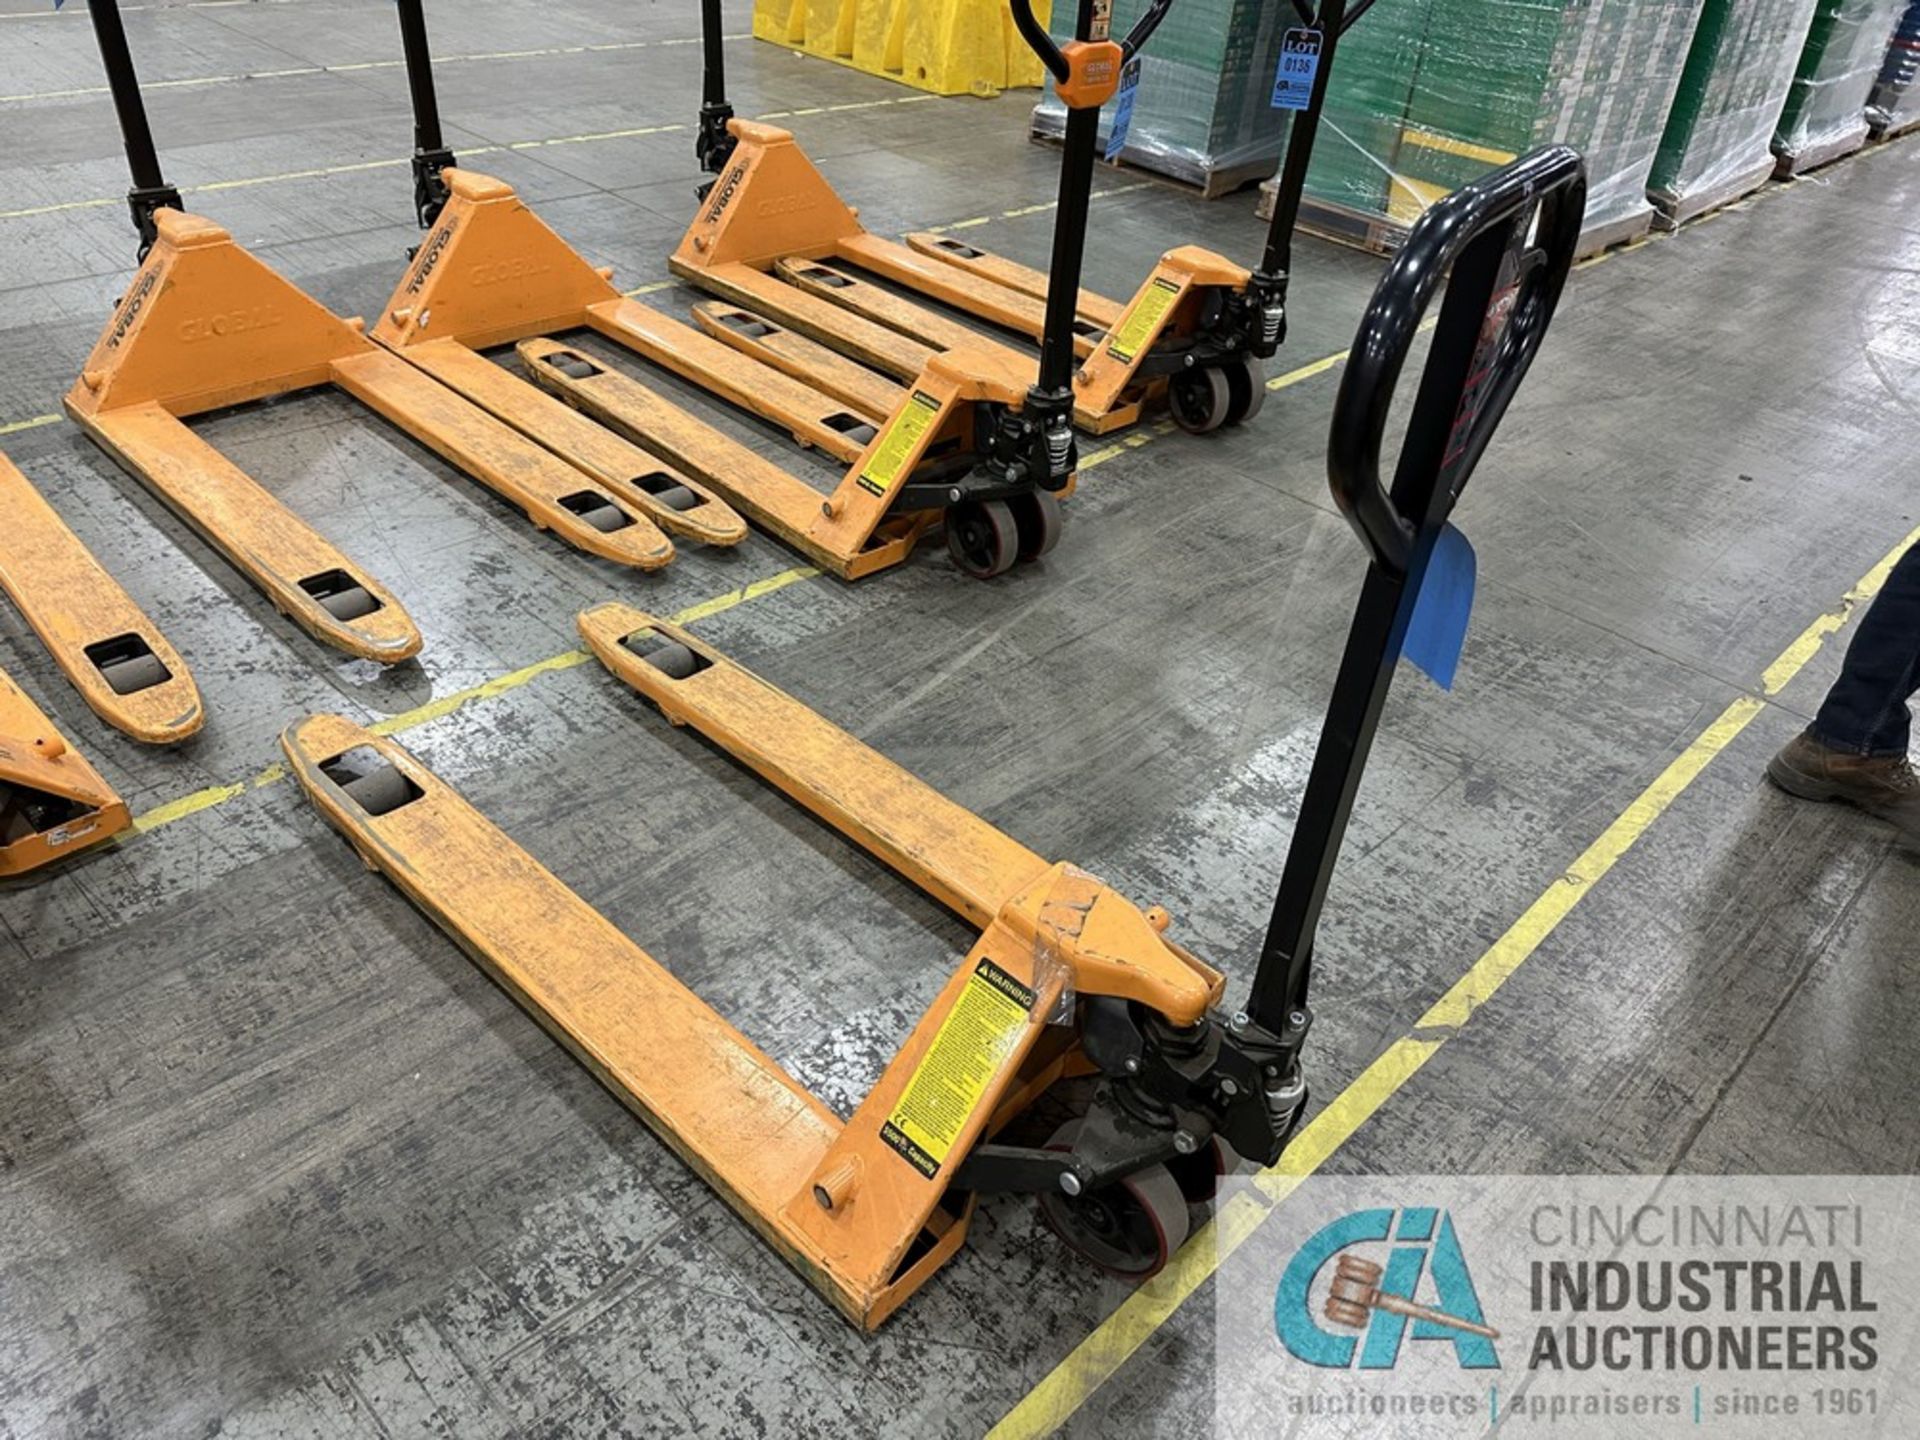 5500 LB. GLOBAL HYDRAULIC PALLET TRUCK - Image 2 of 2